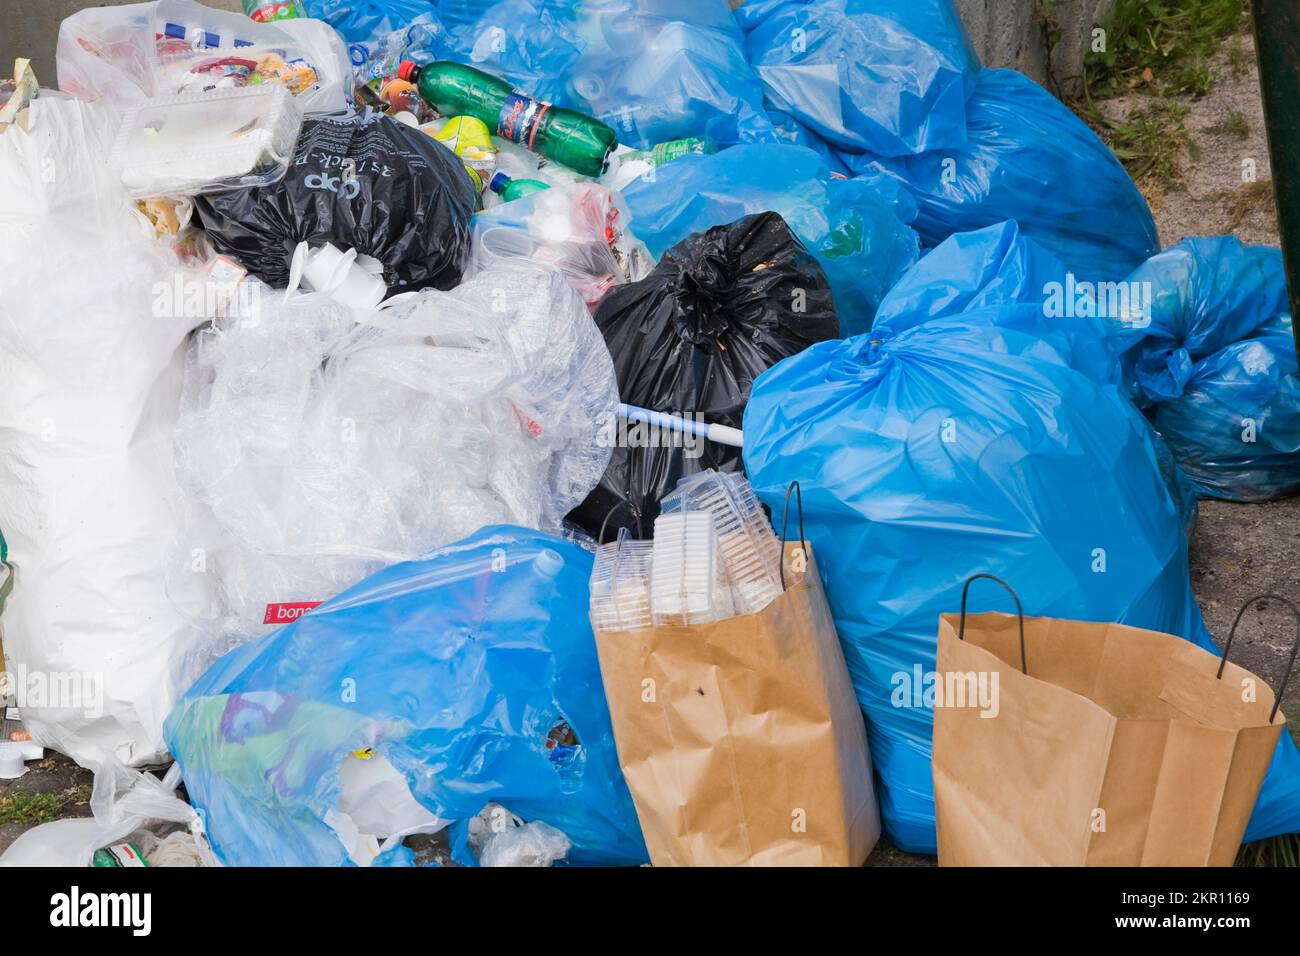 Pile of garbage bags left behind a commercial building, Donovaly village, Slovakia. Stock Photo